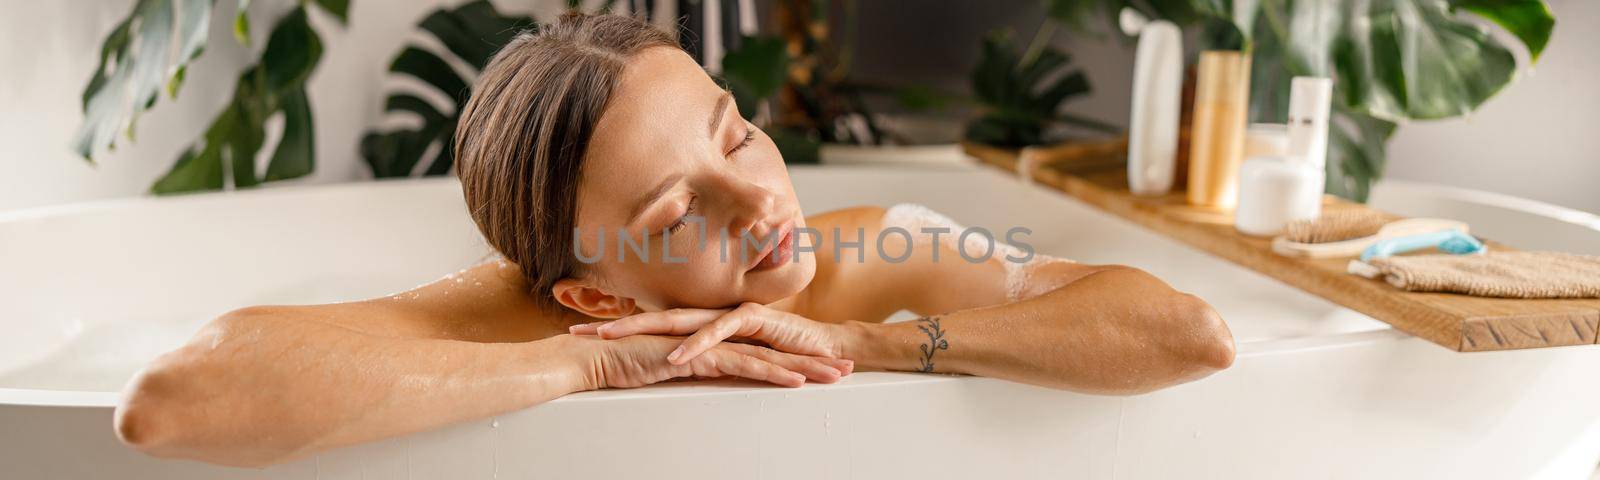 Dreamy young woman leaning on a bathtub side, relaxing with eyes closed at home by Yaroslav_astakhov